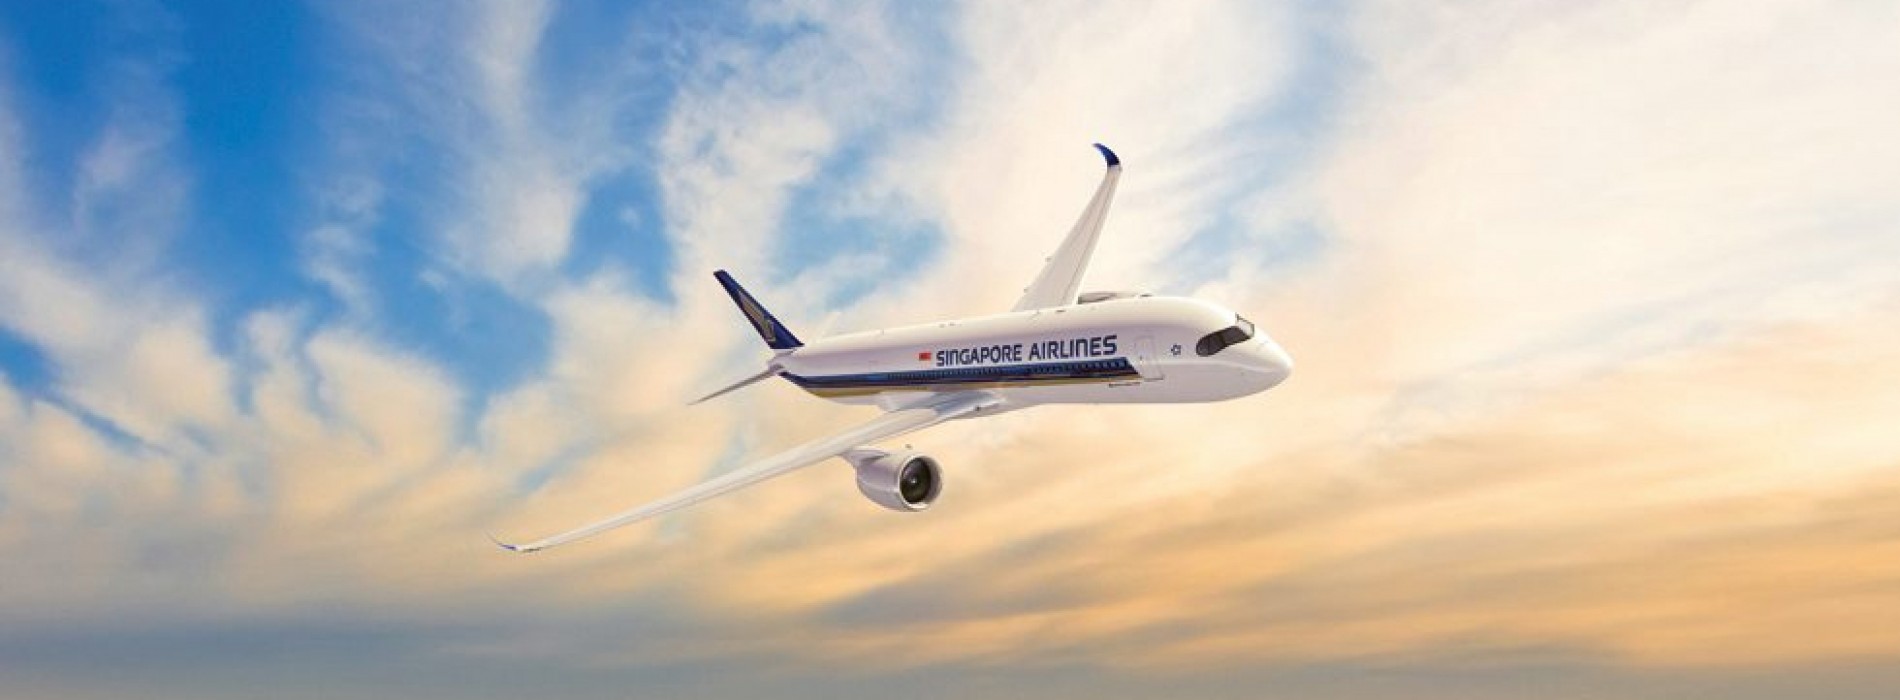 Singapore Airlines to Boost F&B Sustainability Practices